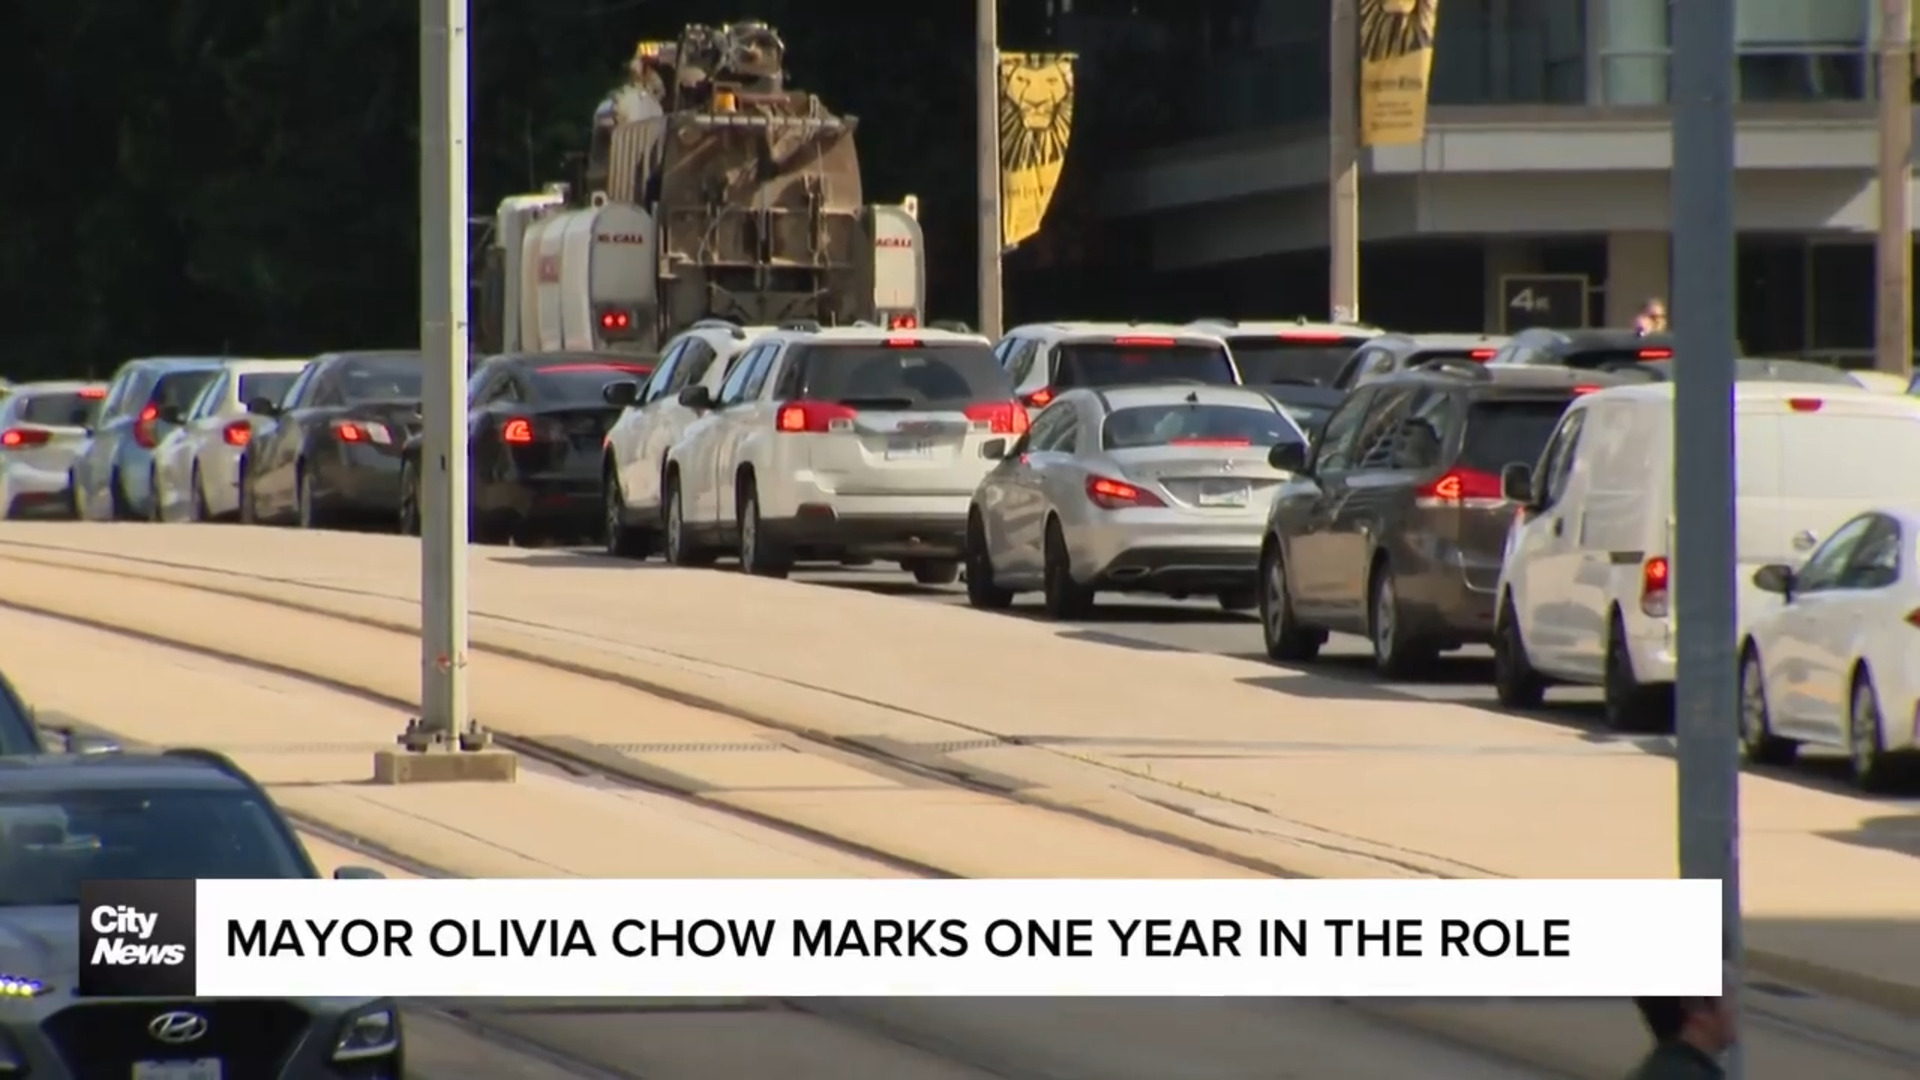 Congestion issues rise as Mayor Olivia Chow marks one year in office